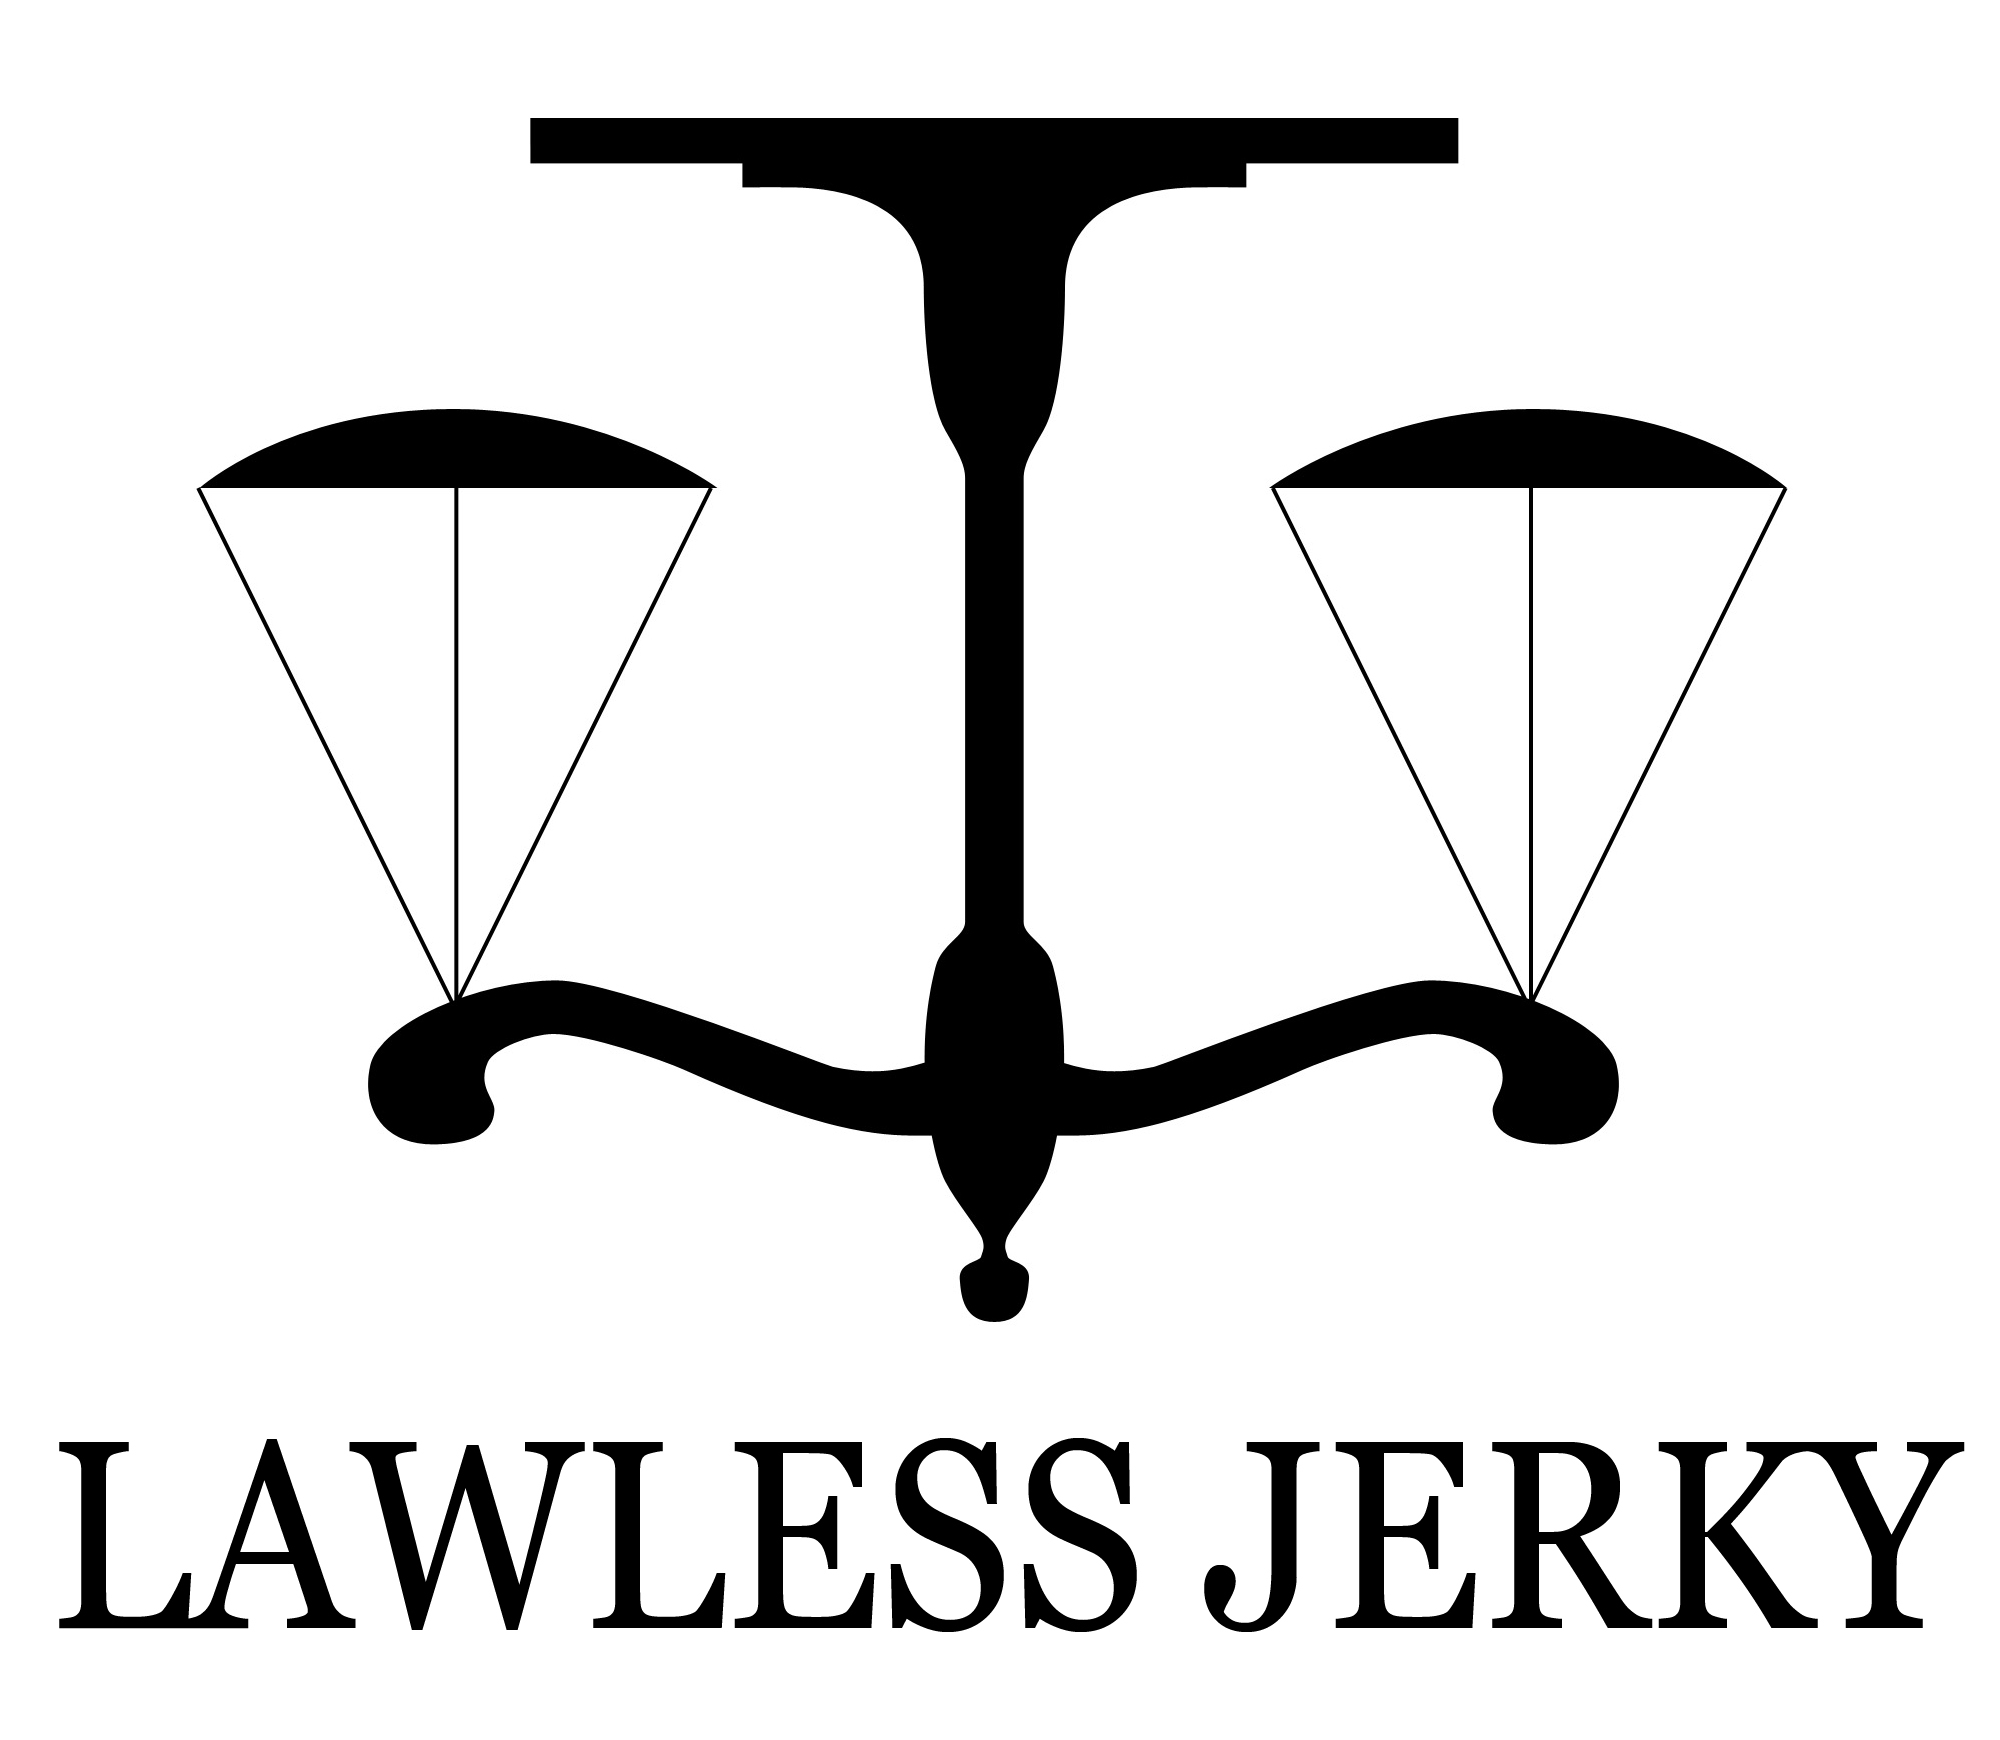 About | Lawless Jerky